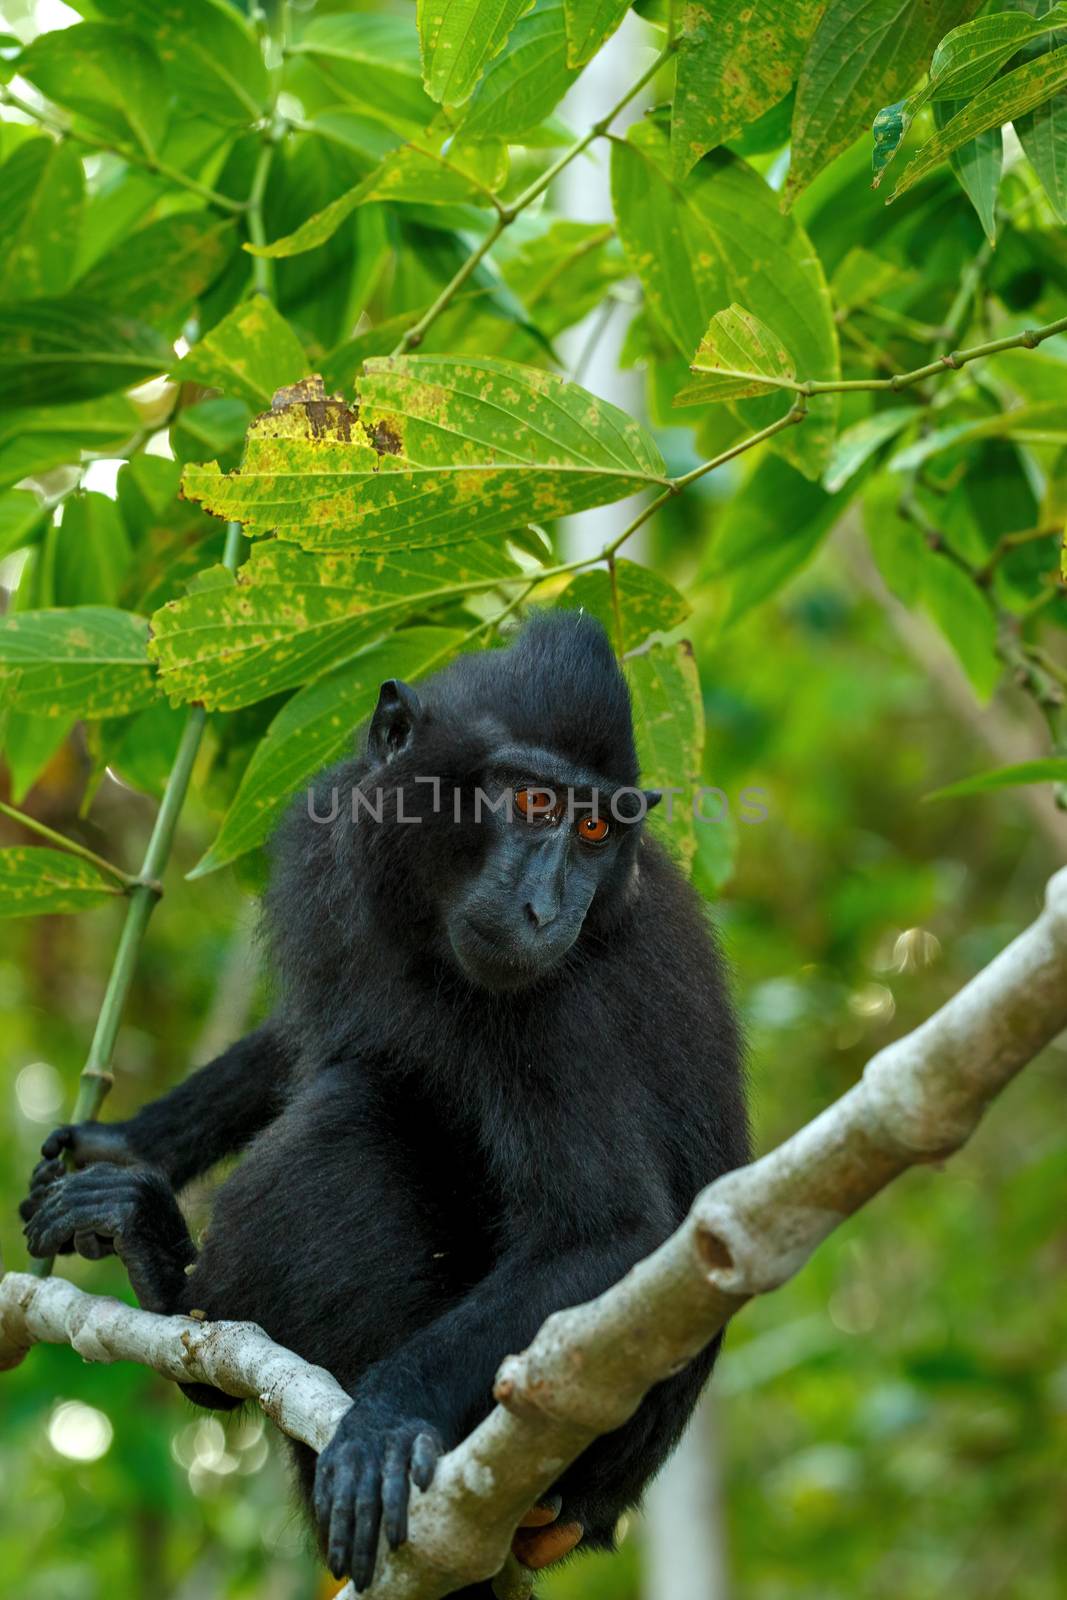 cute baby of endemic monkey Celebes crested macaque known as black monkey (Macaca nigra) in rainforest, Tangkoko Nature Reserve in North Sulawesi, Indonesia wildlife